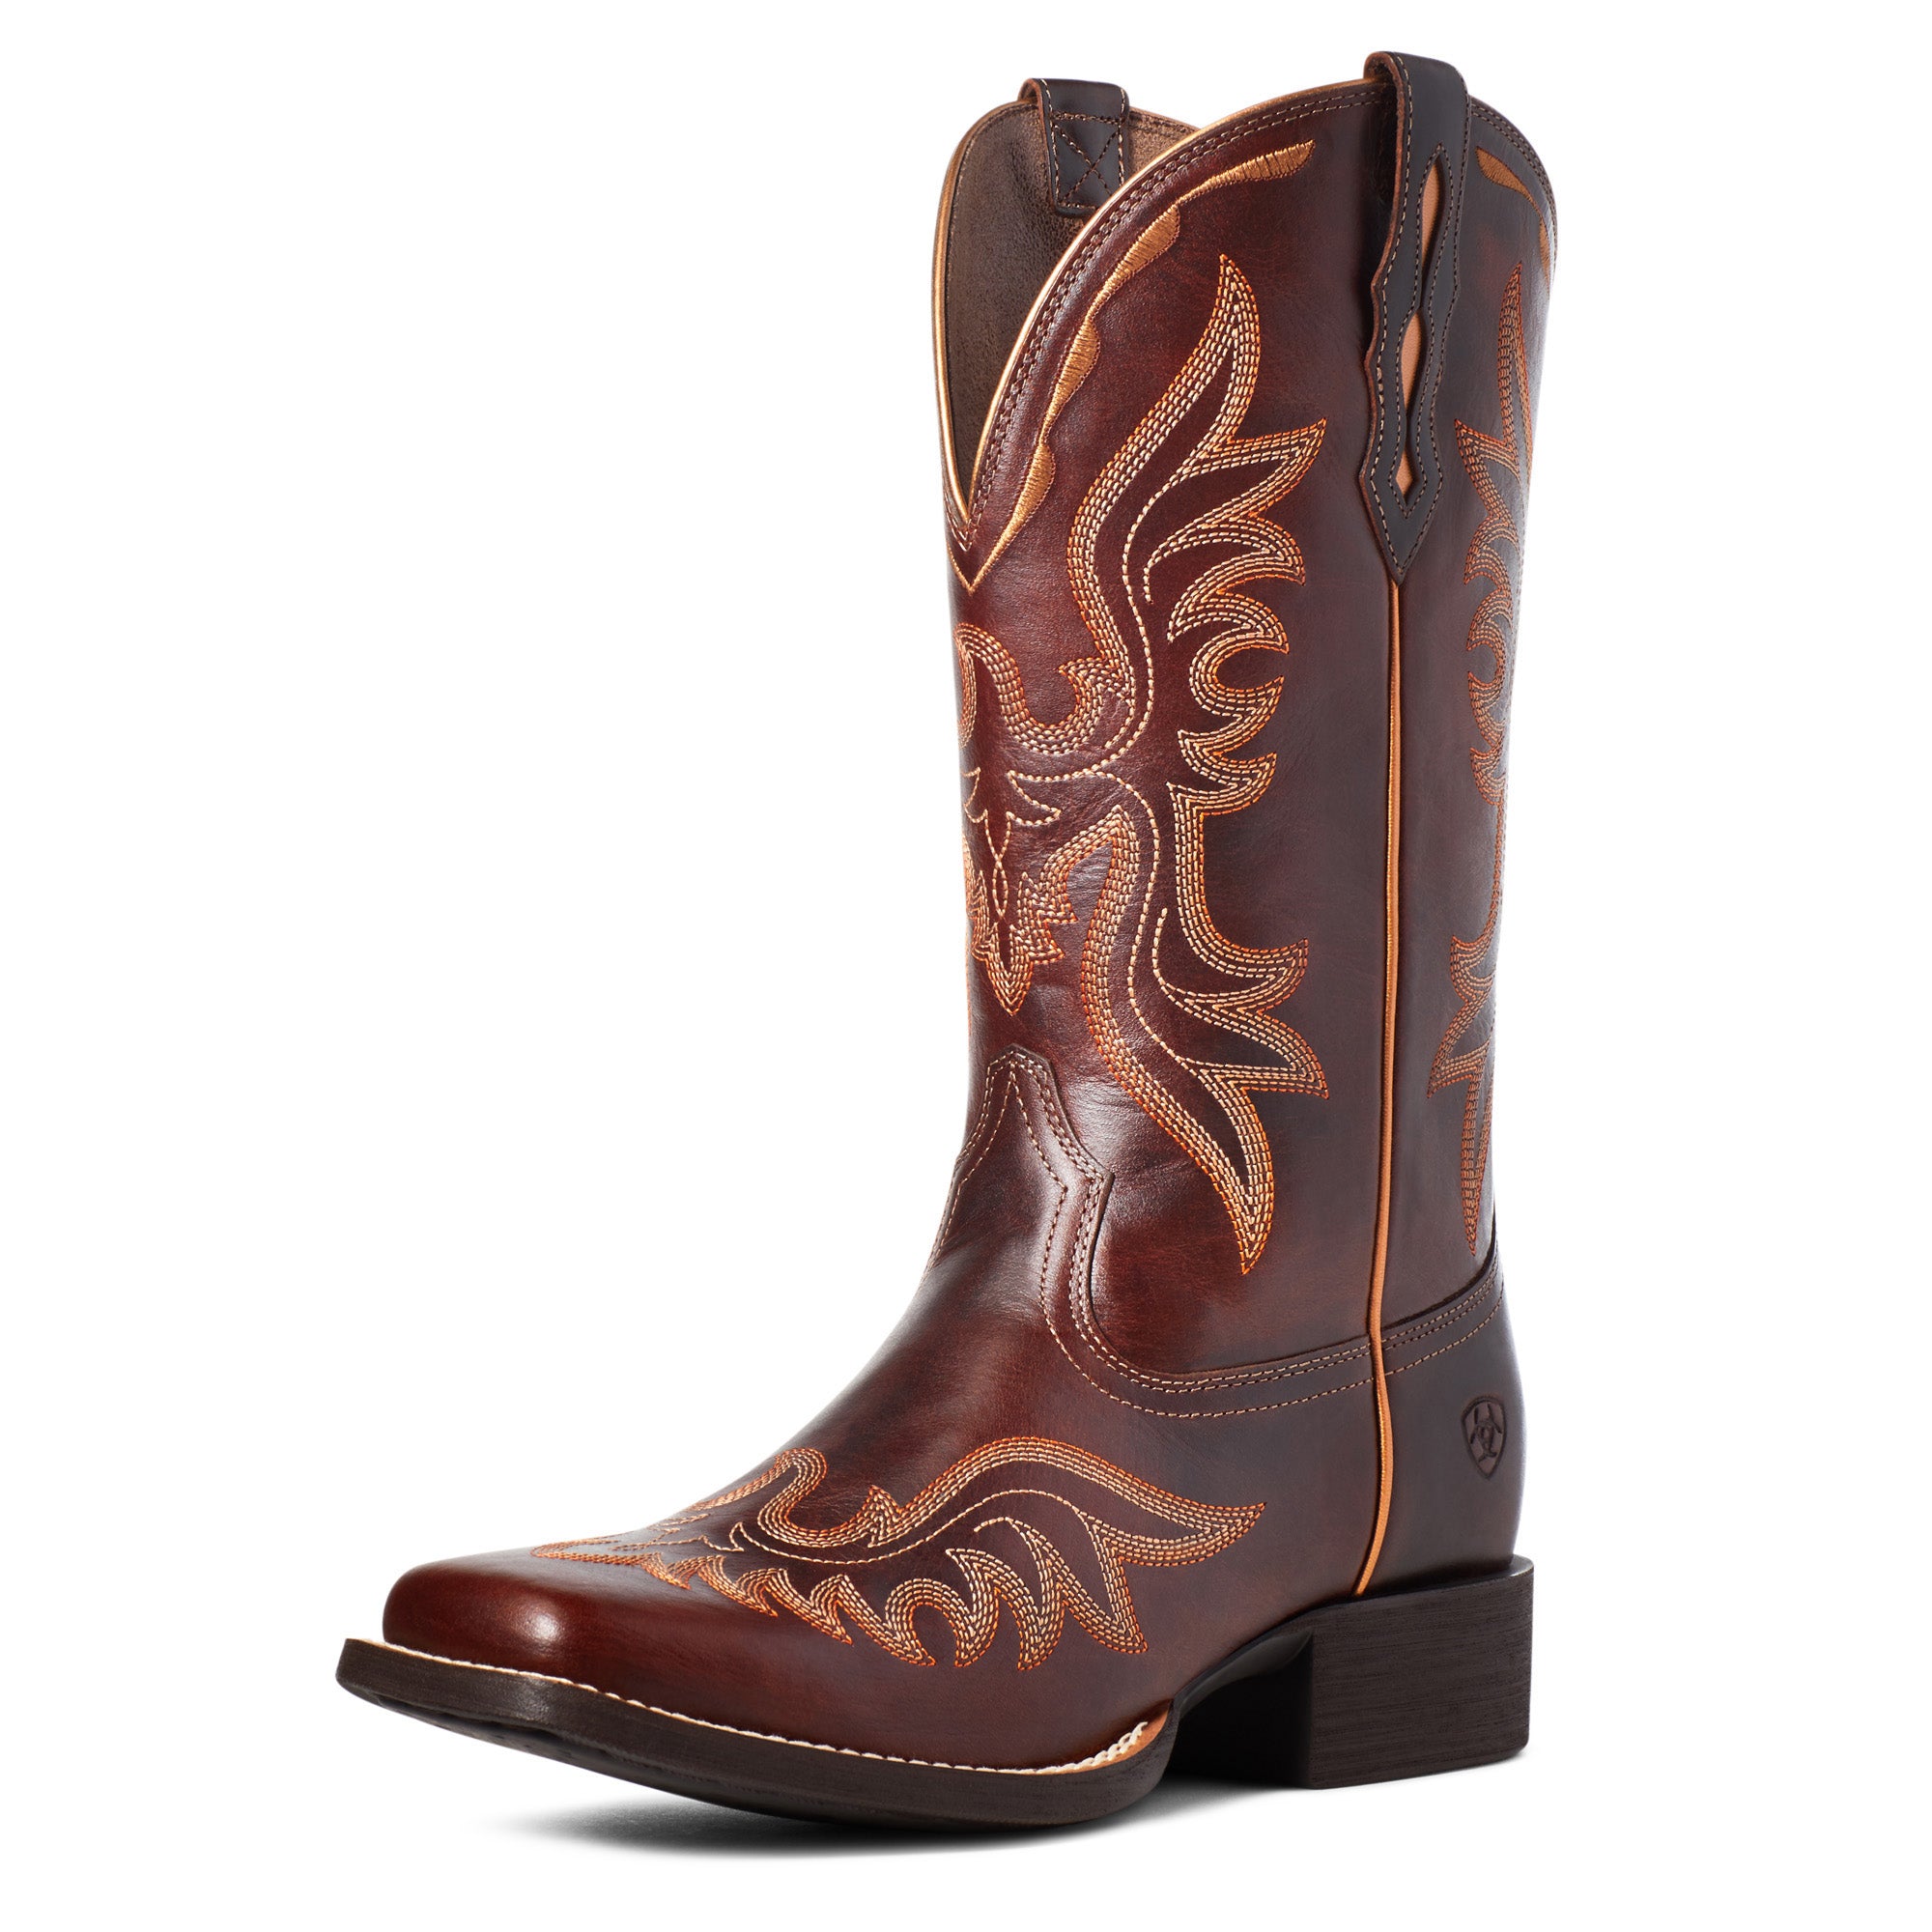 Women's Ariat Round Up Flutter, Mahogany STYLE # 10036022